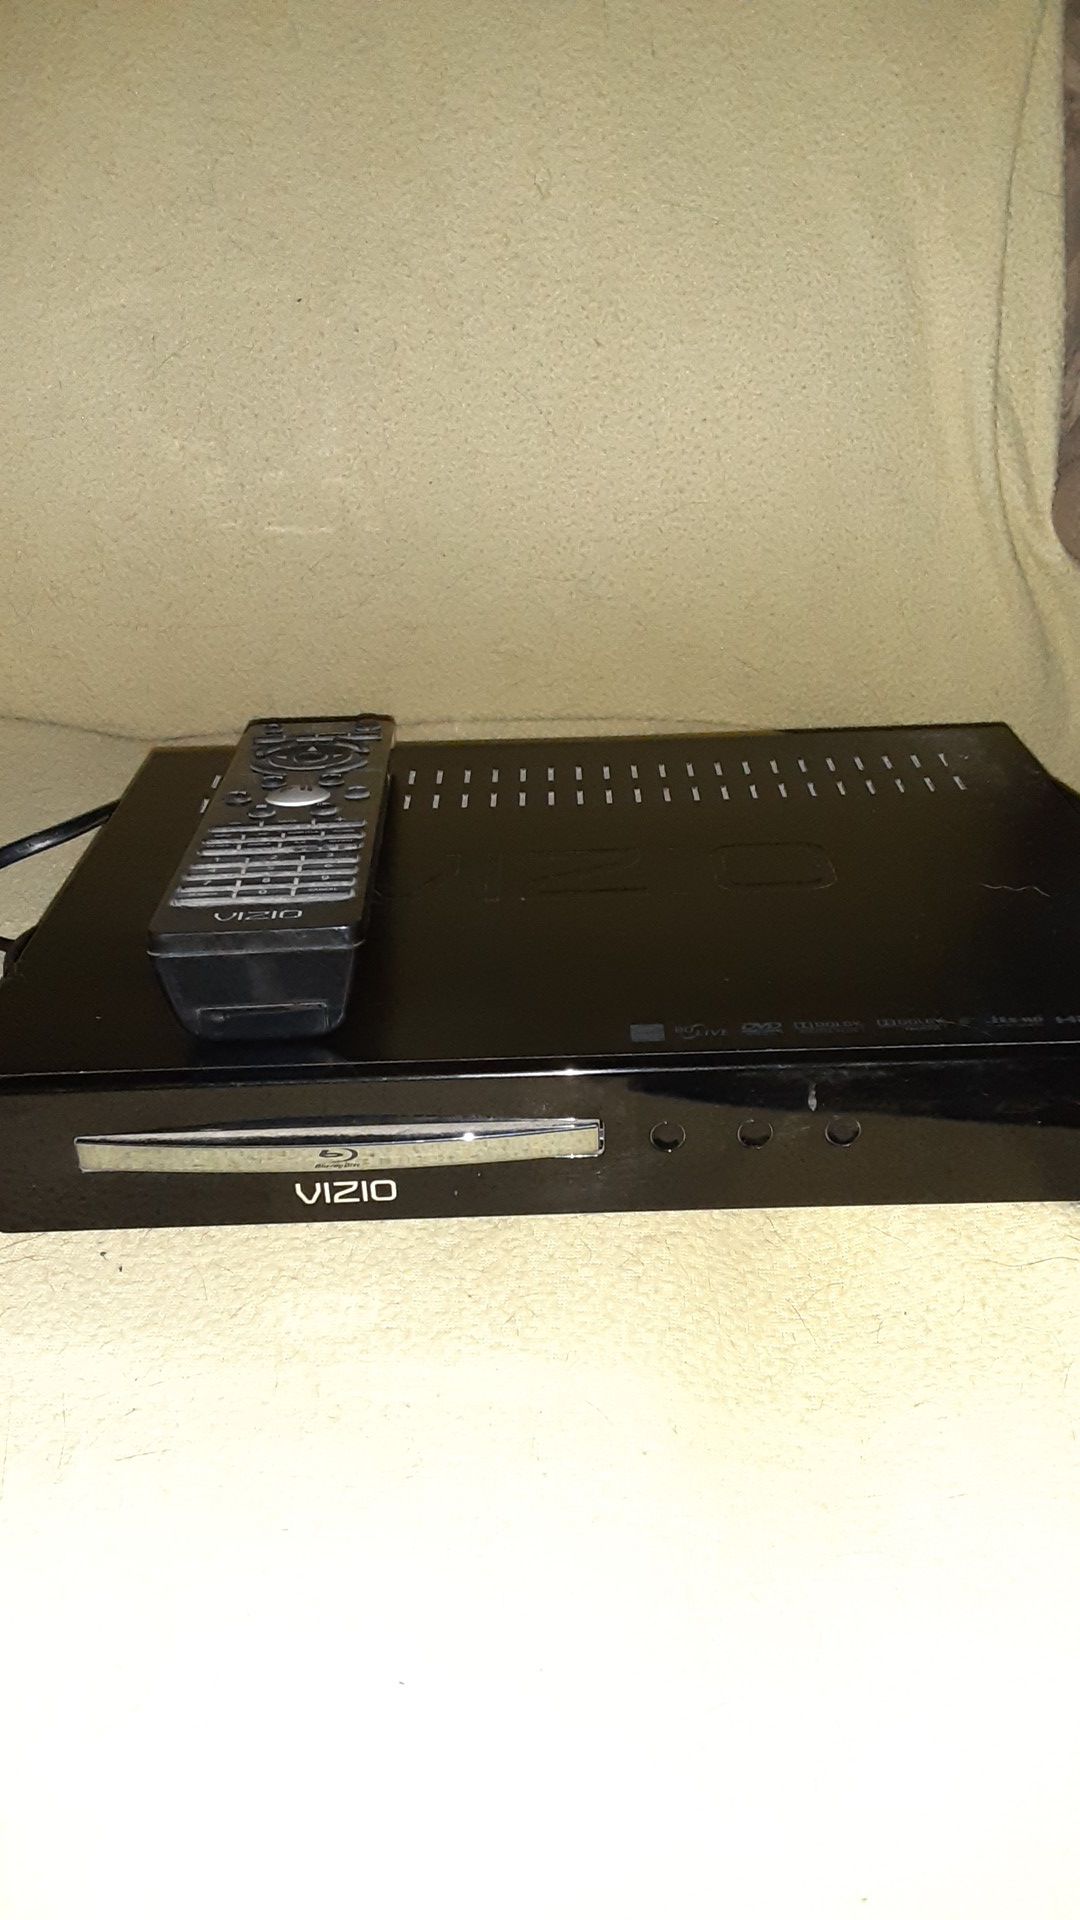 VIZIO DVD PLAYER has Netflix on there and other stuff and you can play Blue Ray DvDs also.